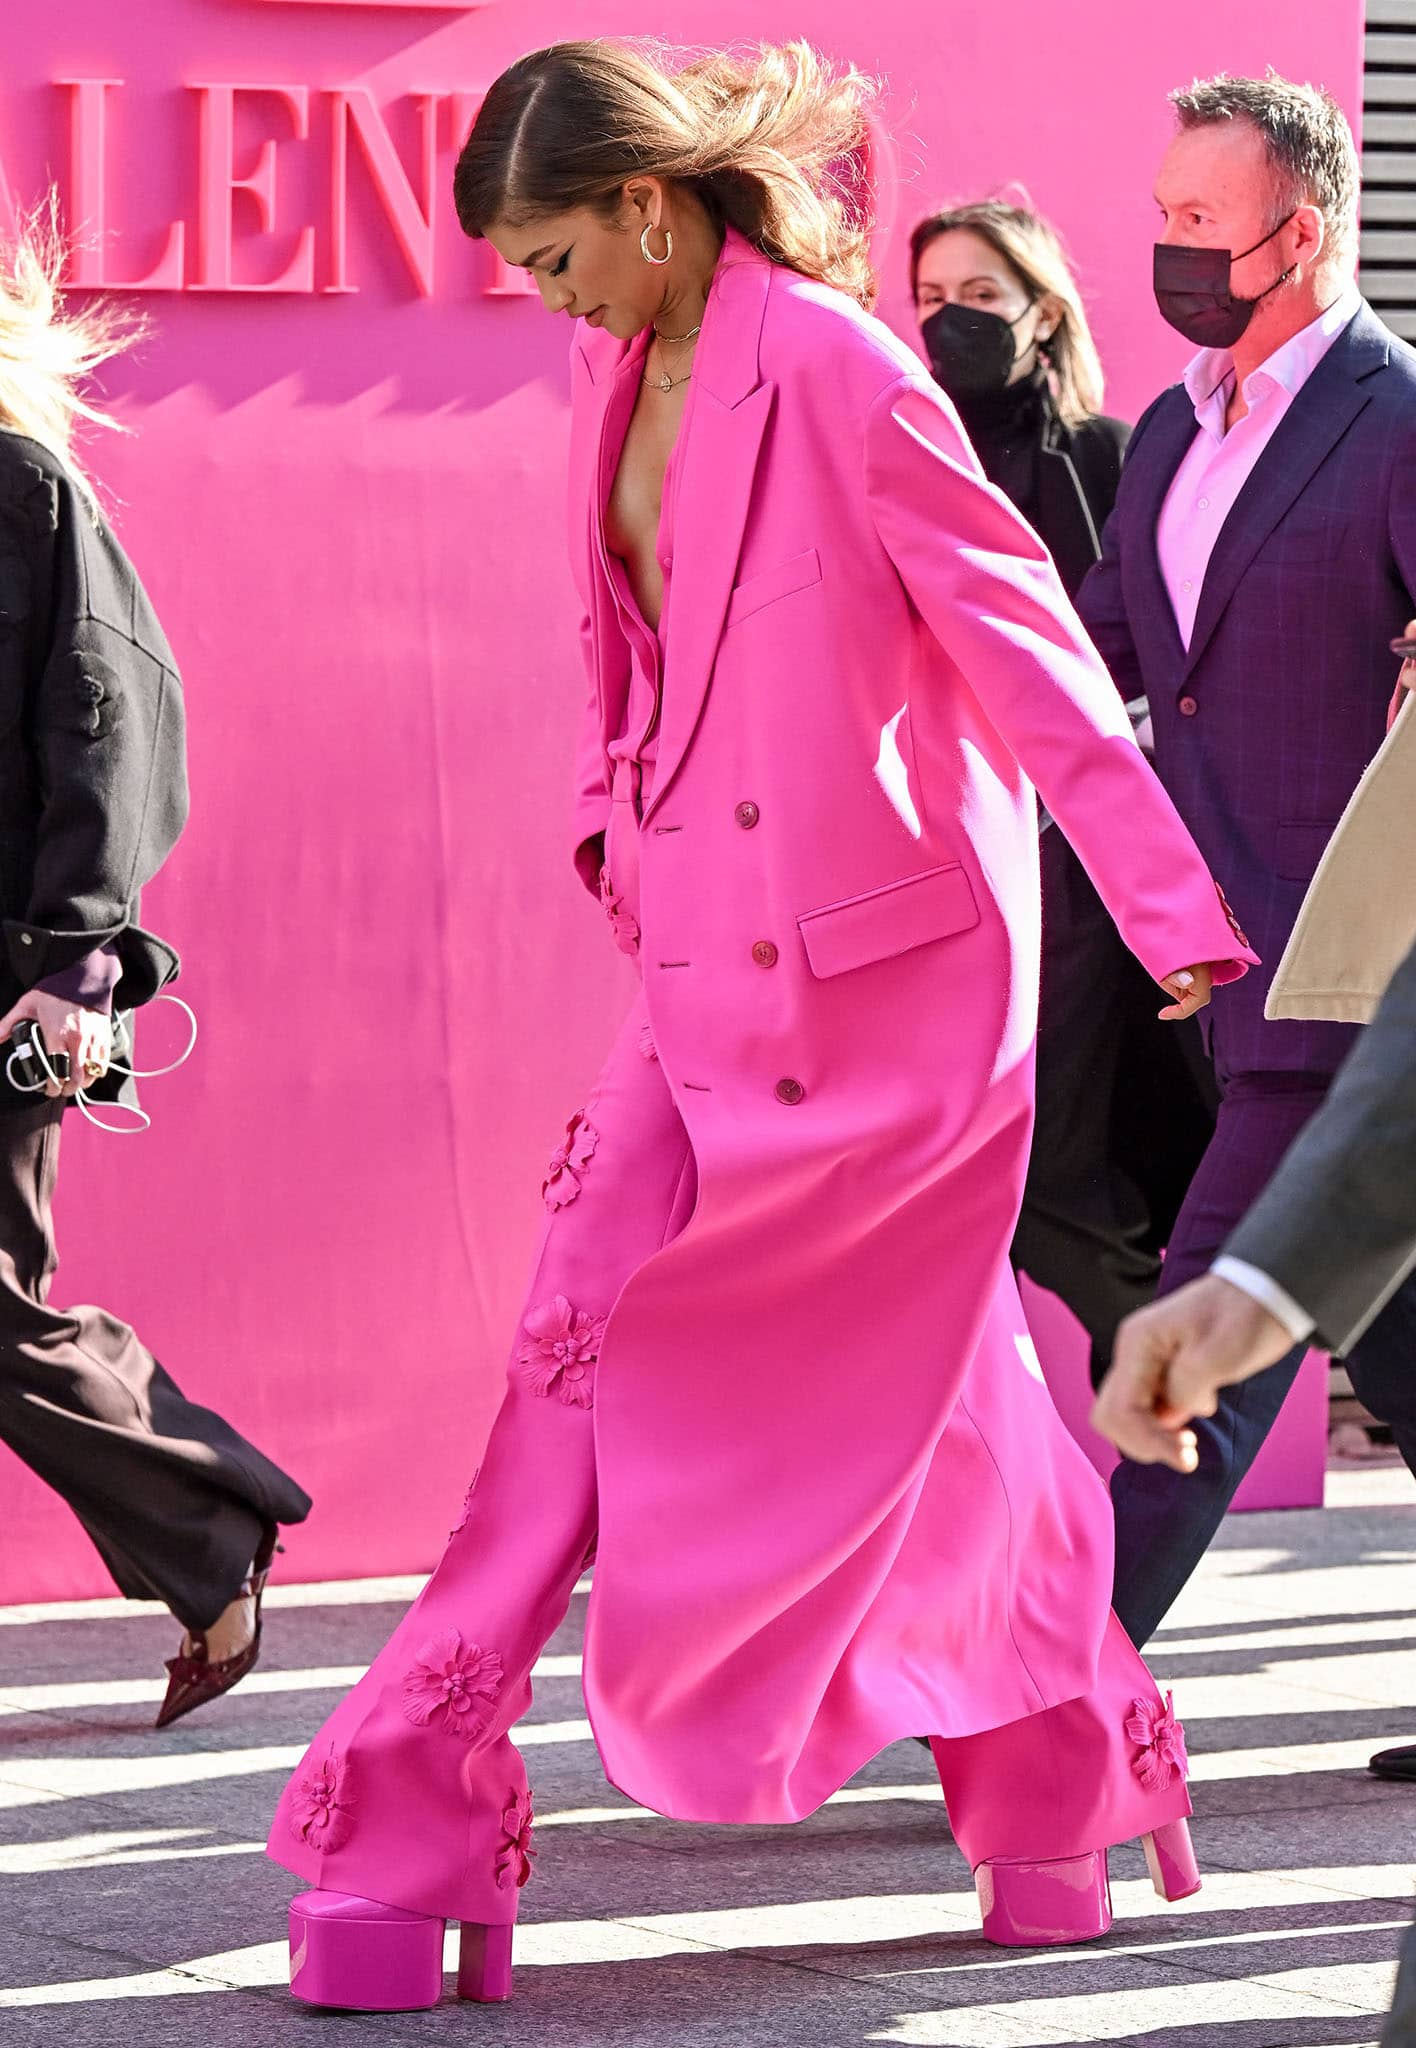 Zendaya goes braless underneath her Valentino pink coat, pink blouse, and pink suit with floral appliques